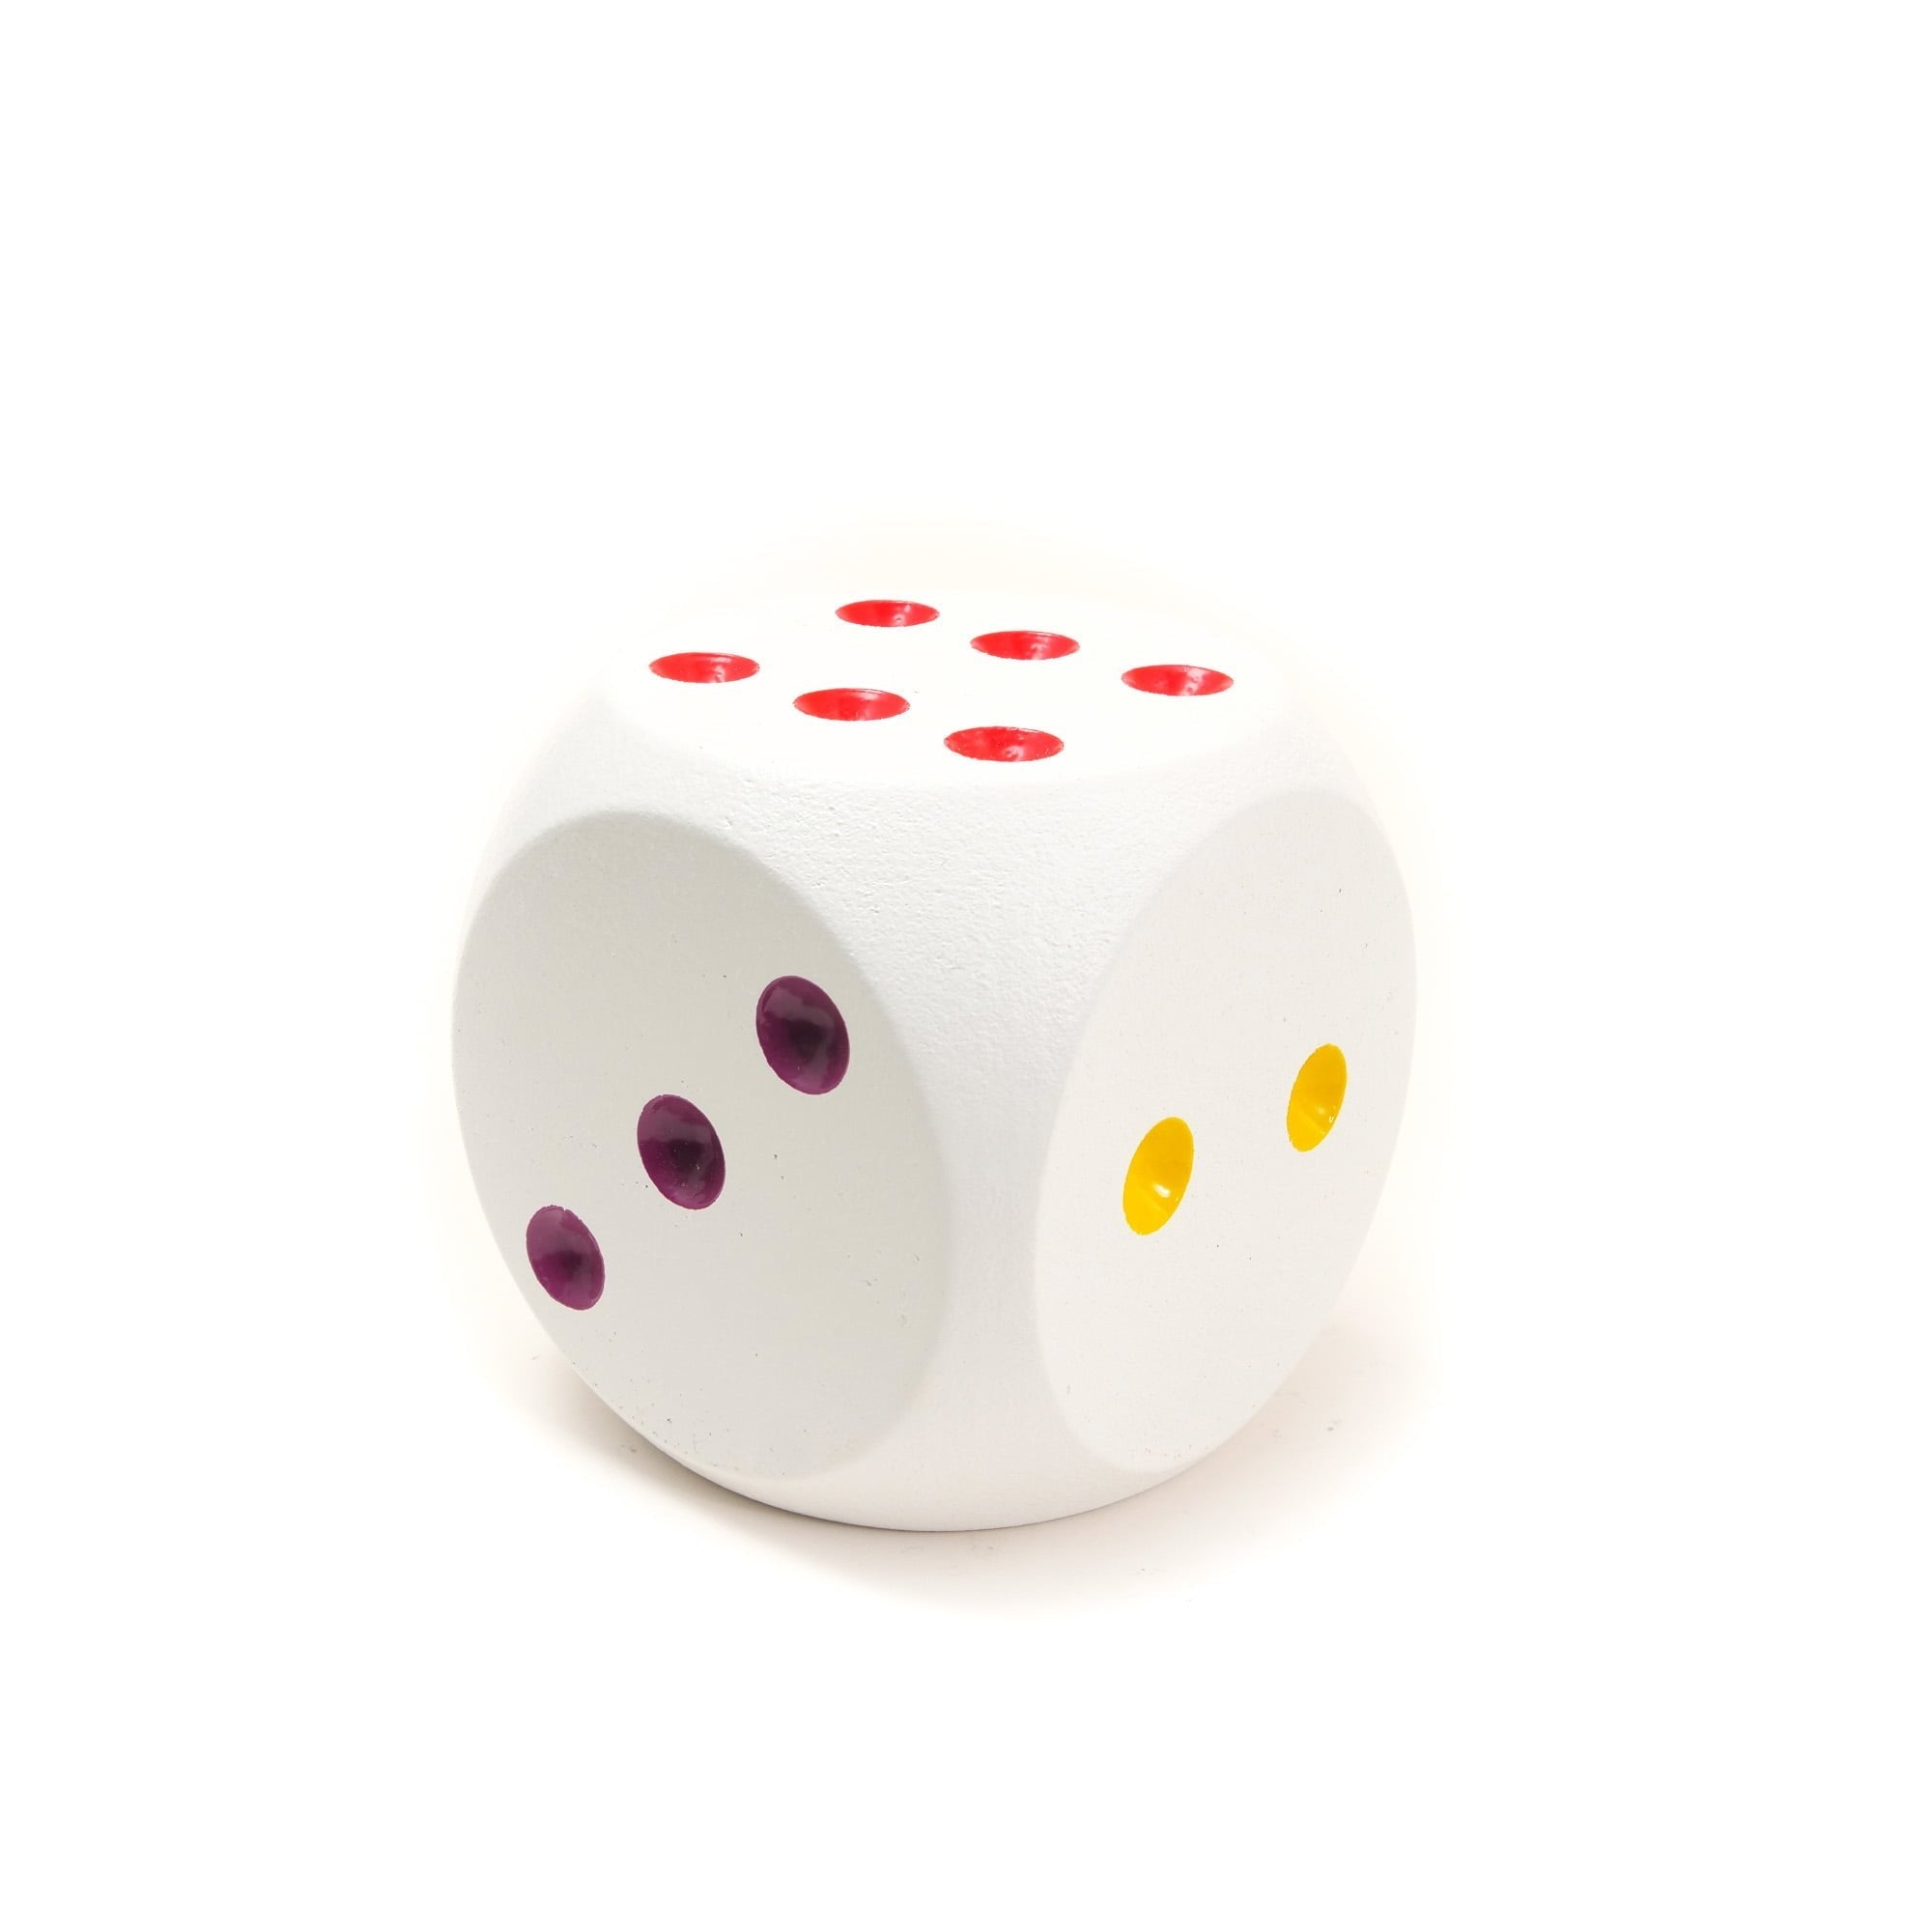 House Of Marbles Wooden Giant Dice - White-House Of Marbles-Little Giant Kidz